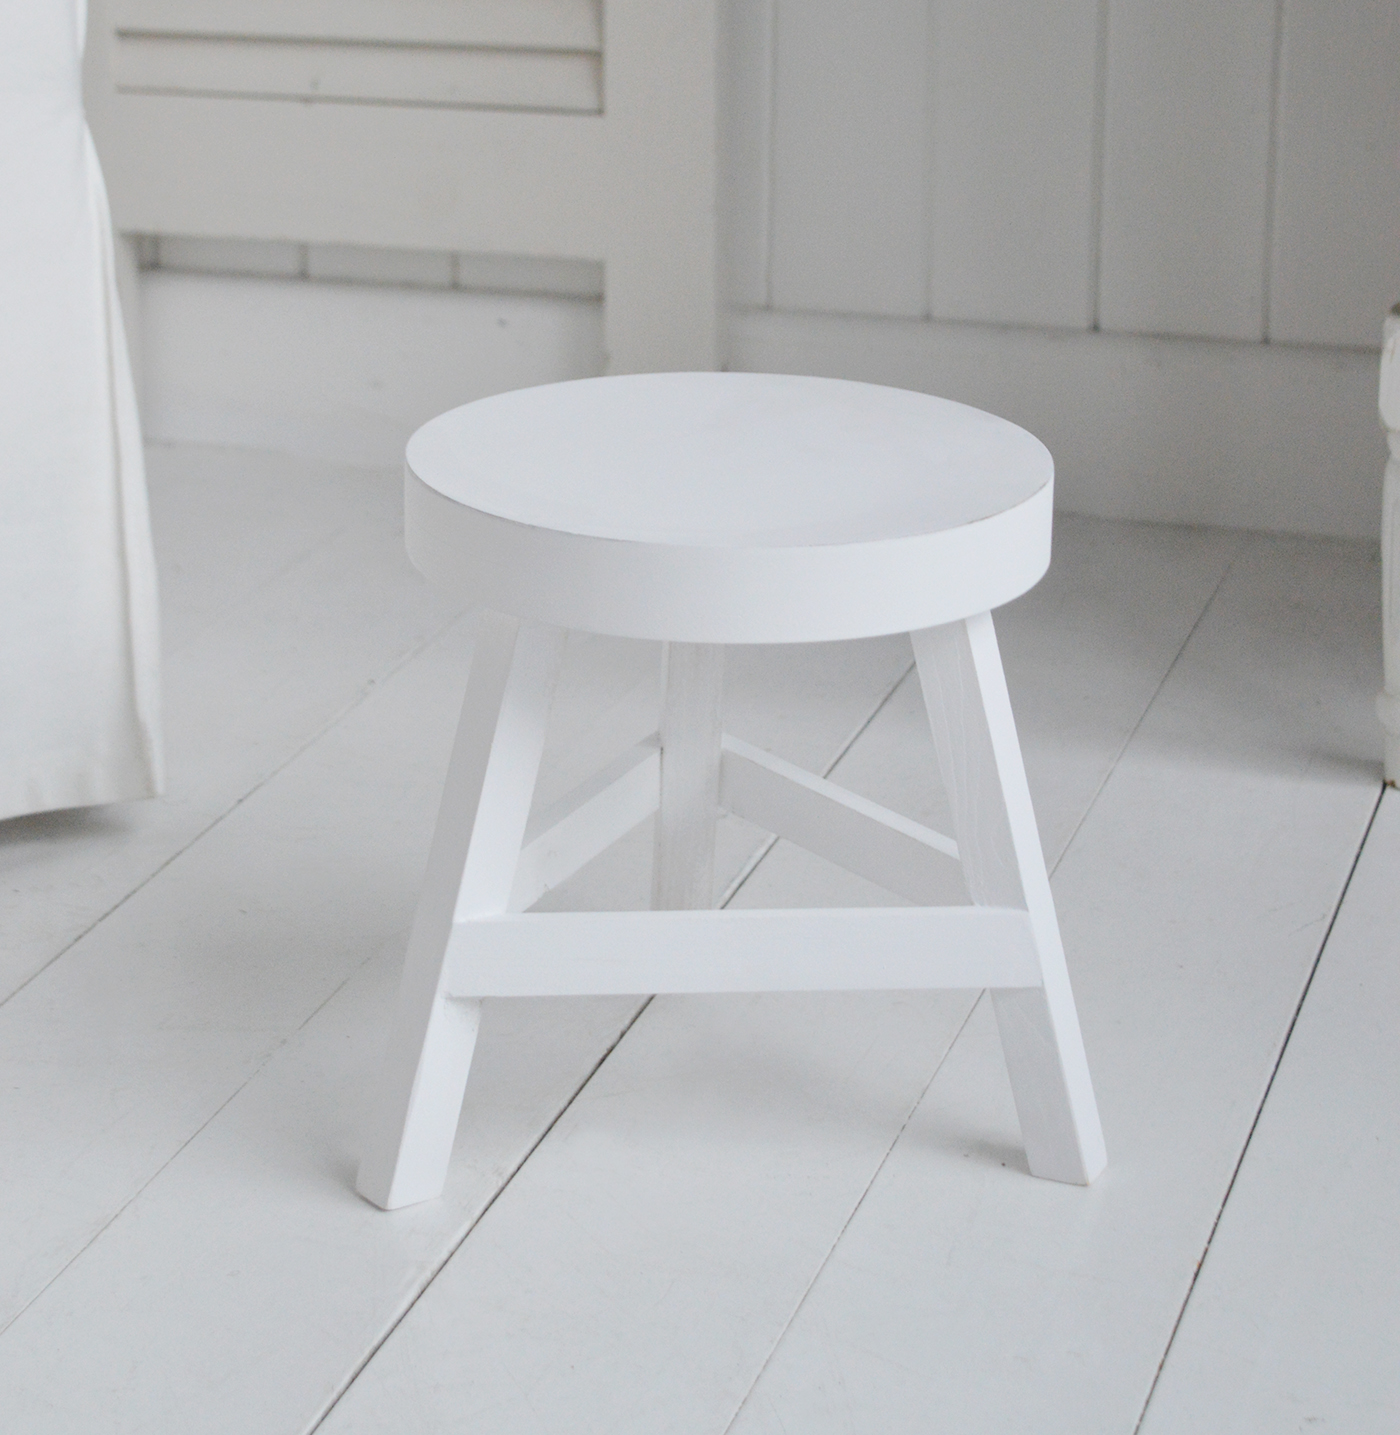 Nantucket round wooden white milking stool - Coastal and Modern Country Furniture